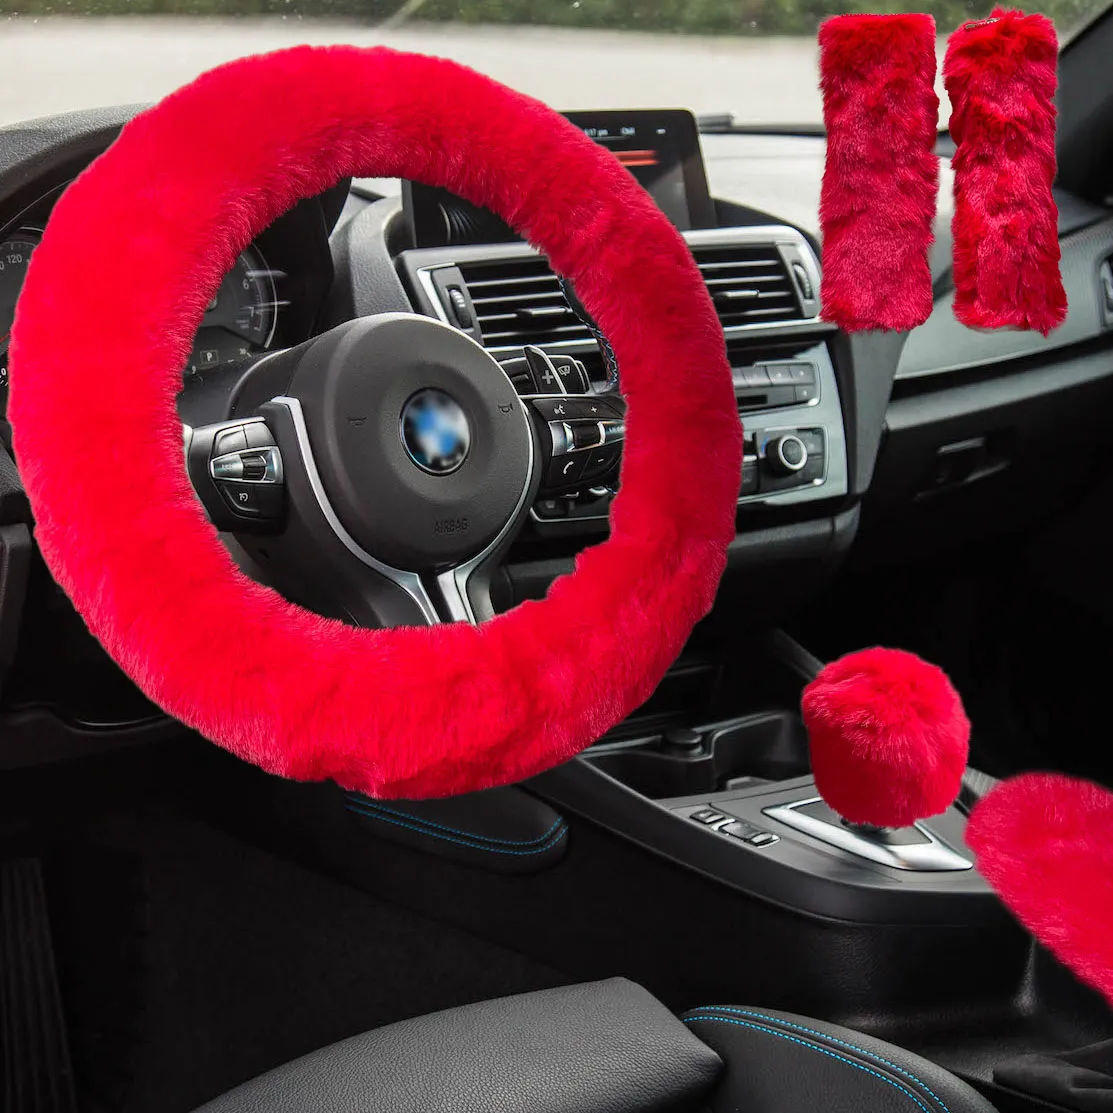 Luxurious Faux Fox Fur Fluffy Steering Wheel Cover For Women And Girls Cute Fuzzy  Handbrake & Gear Shift Cover Dec2683 From Yq5664, $10.14